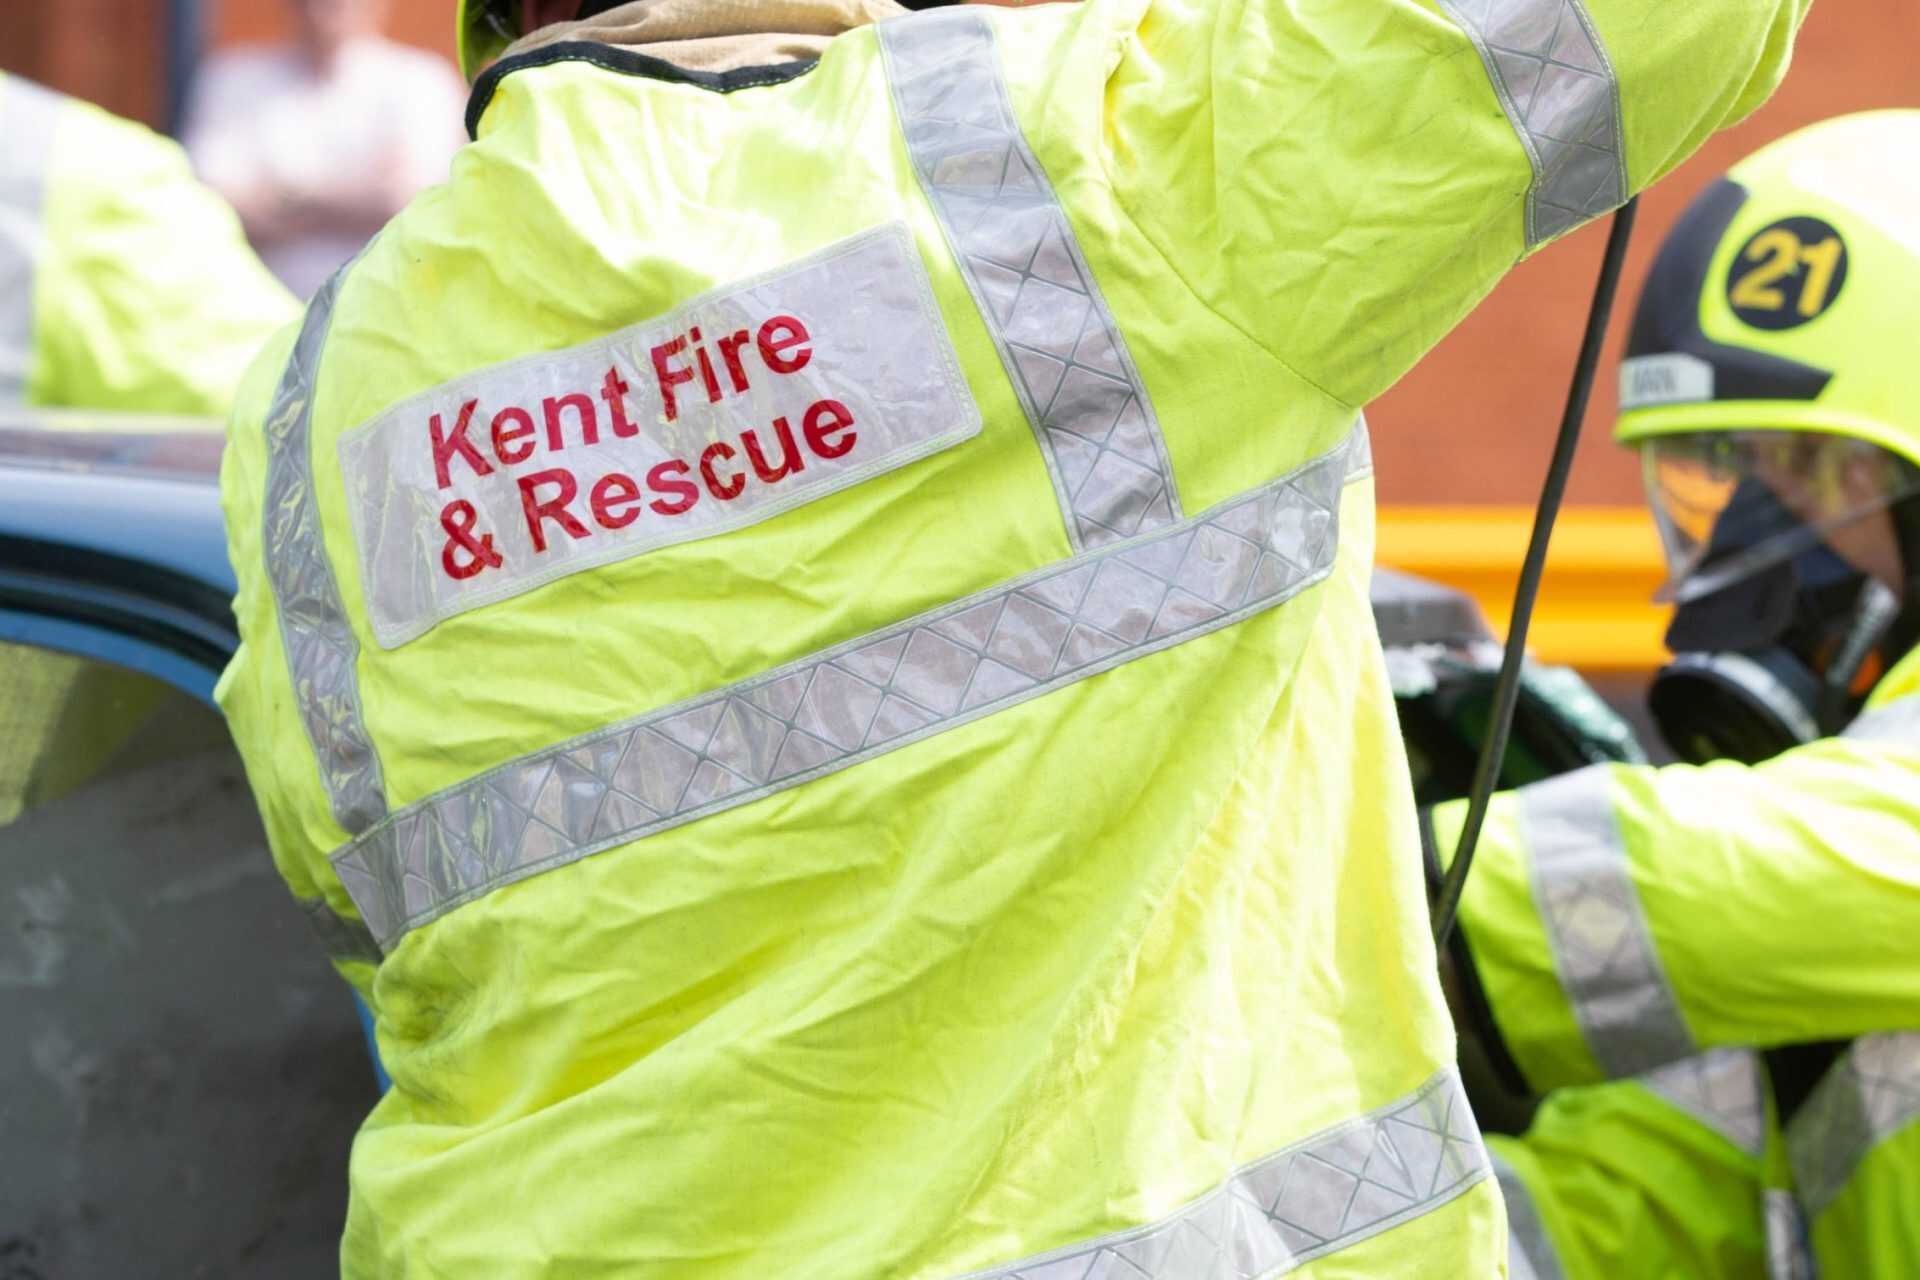 Kent Fire and Rescue personnel in fluorescent jackets